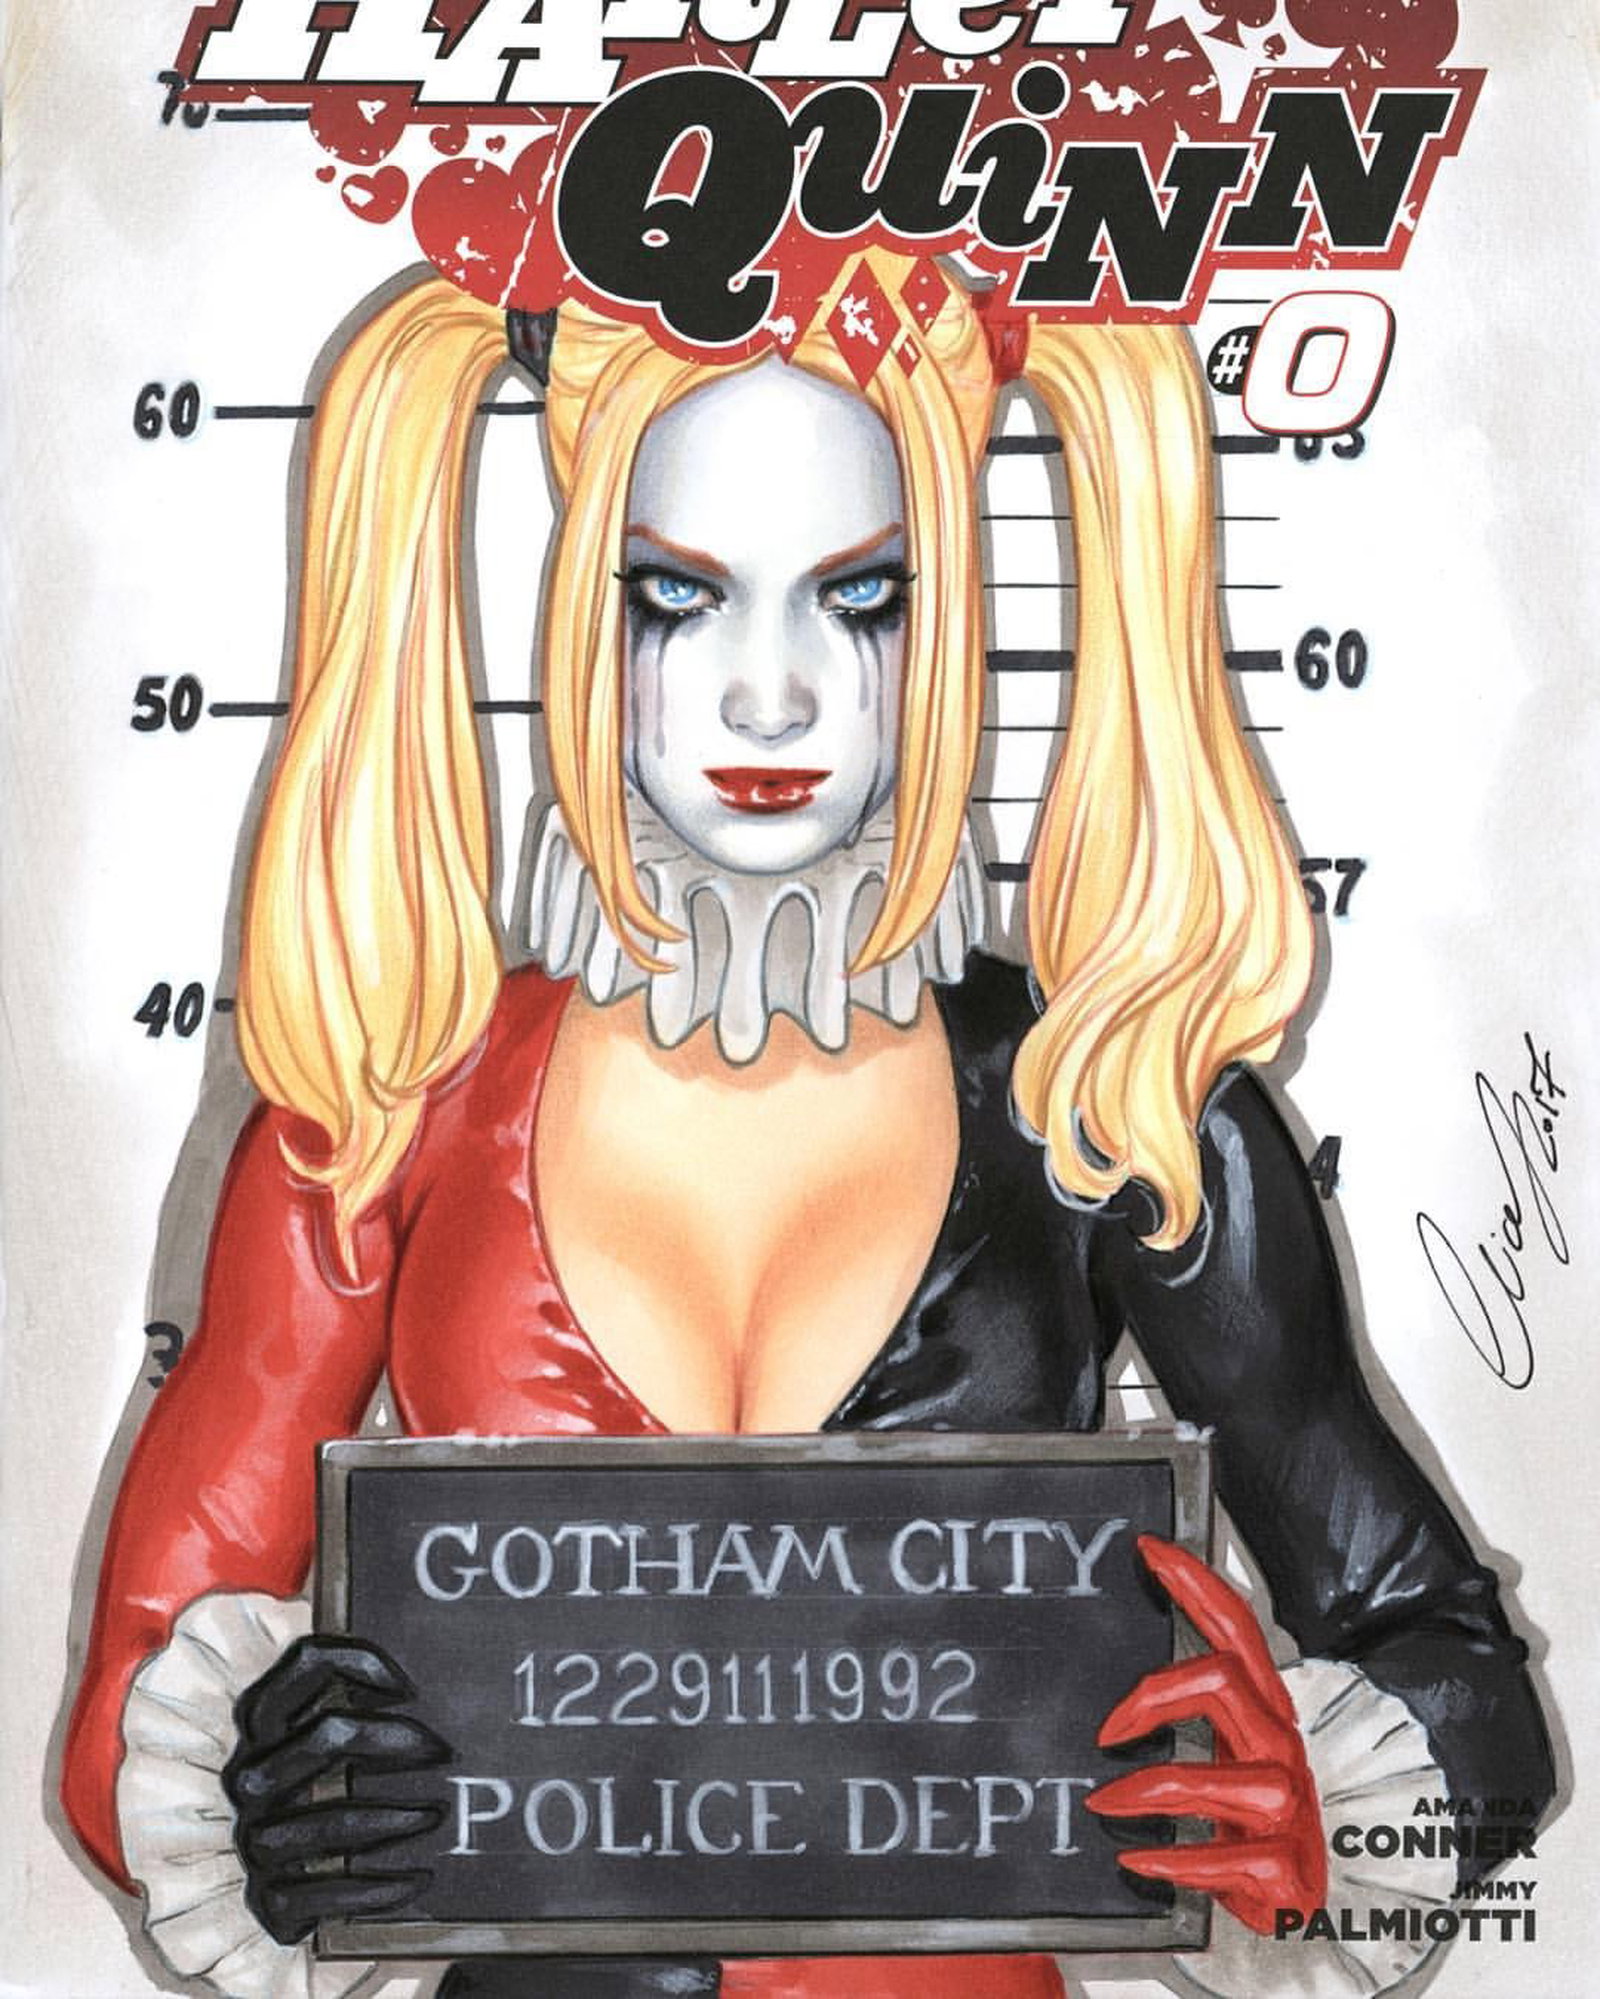 Photo by Justanotherguy with the username @Justanotherguy79,  February 3, 2017 at 2:43 AM and the text says 'eliaschatzoudis:#harleyquinn As requested(Like Adams Hughe’s Catwoman DC Cover) #copicmarkers #colorpencil #acrylics #eliaschatzoudis #chatgr #mugshot'